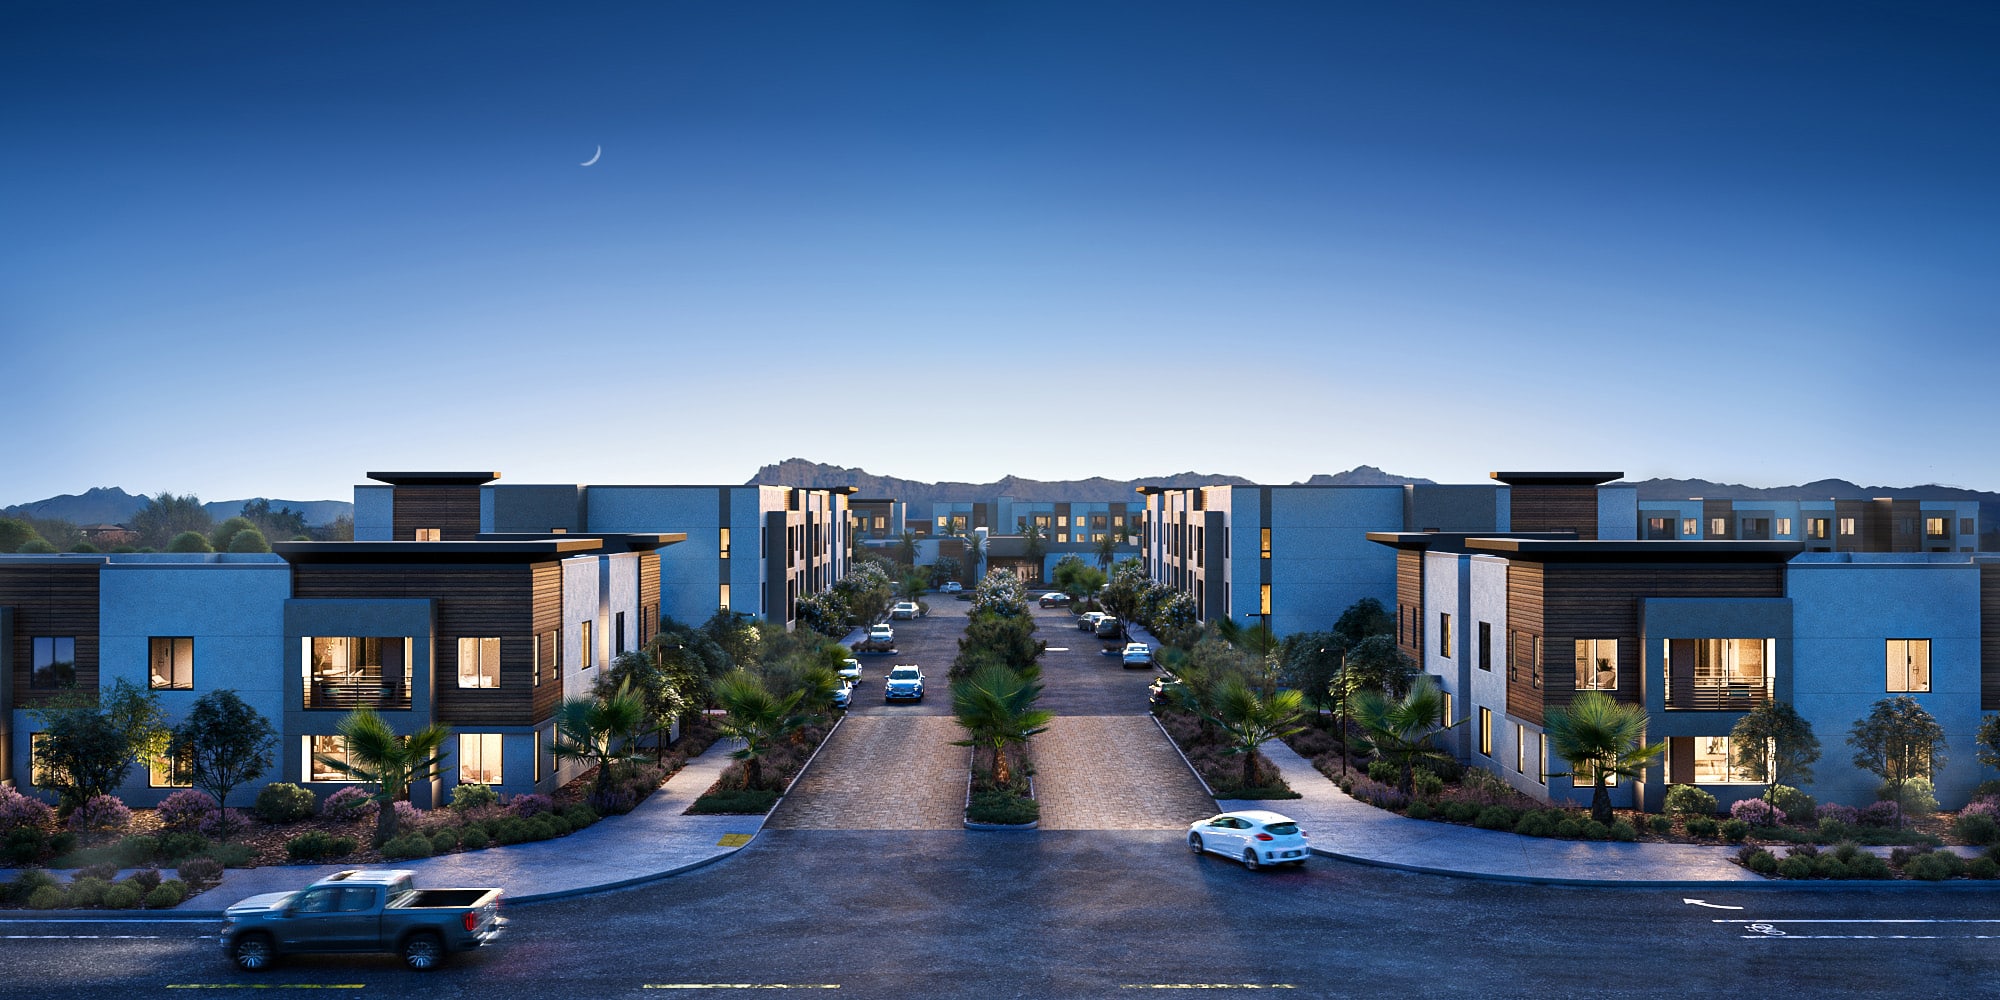 An exterior rendering of the Navona apartment community at dusk with mountains in the background